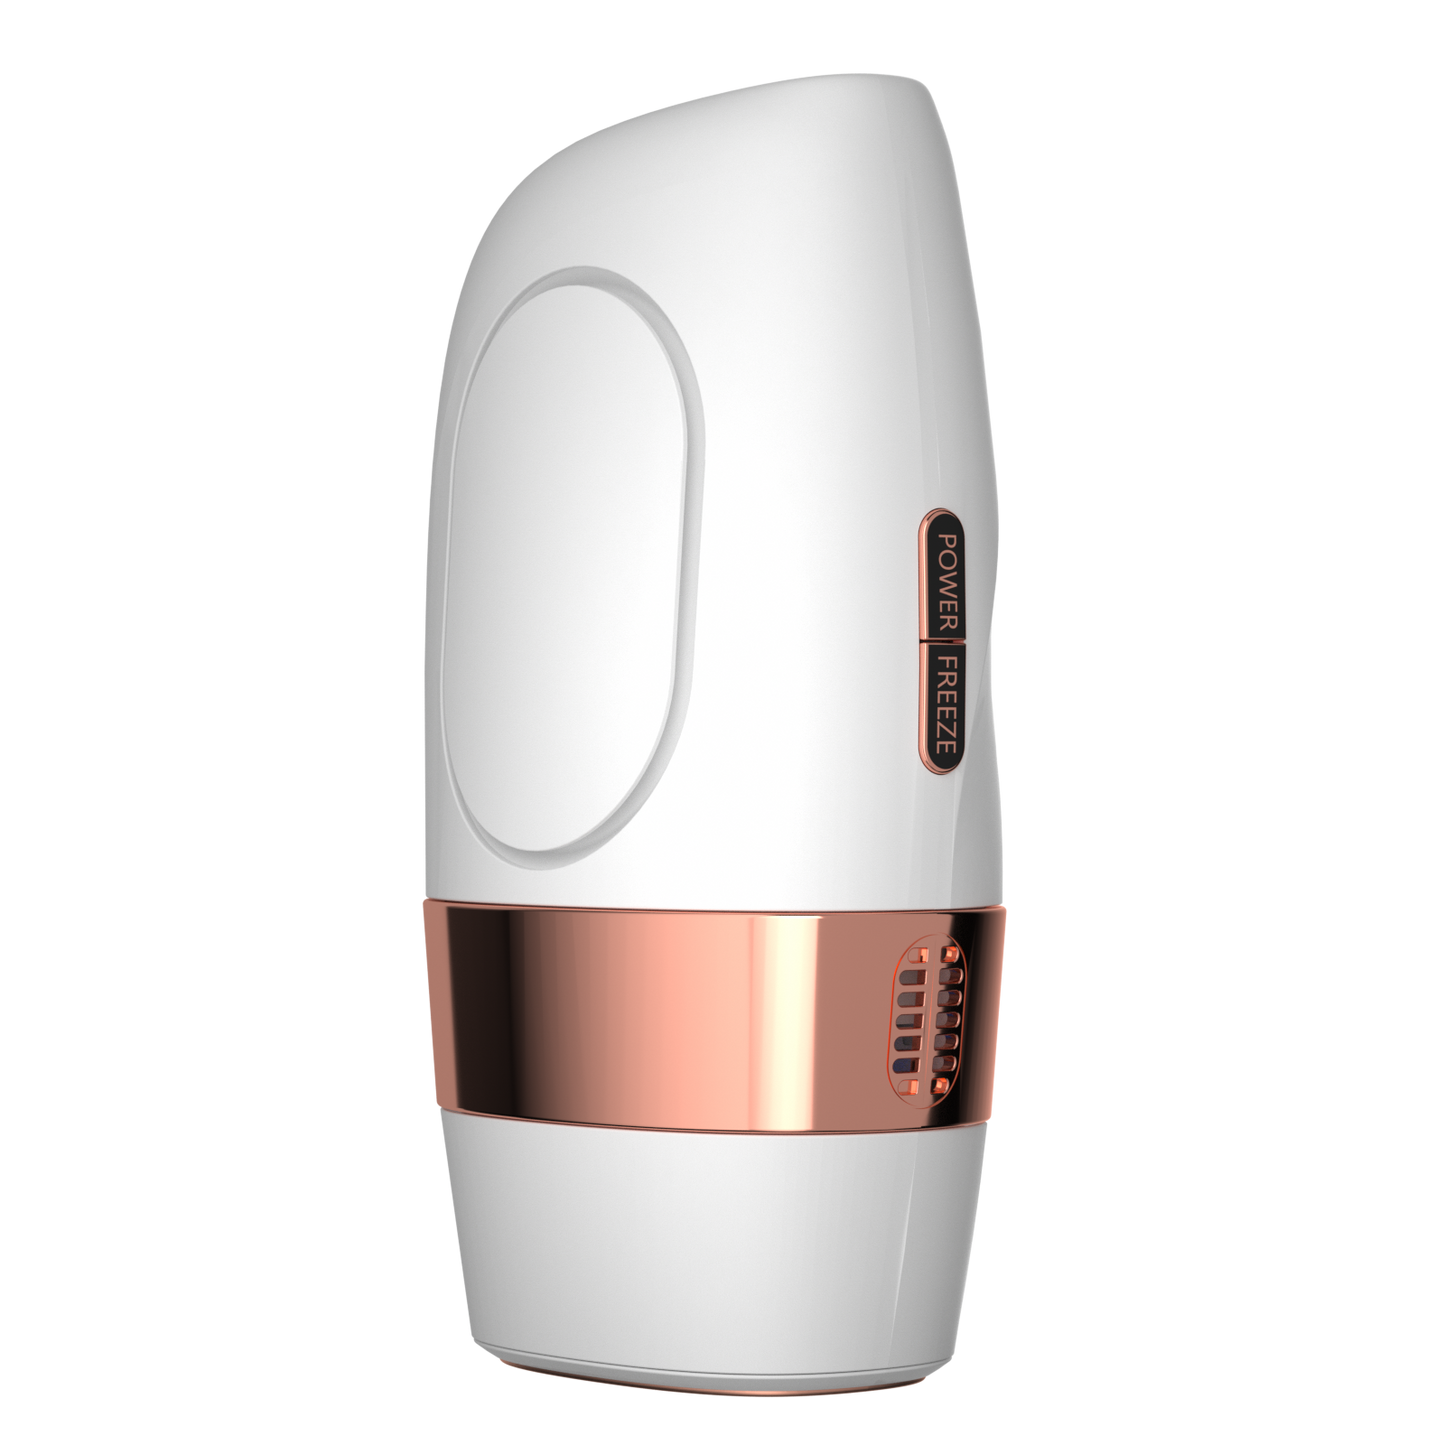 IPL Hair Removal Device at Home for Women and Men